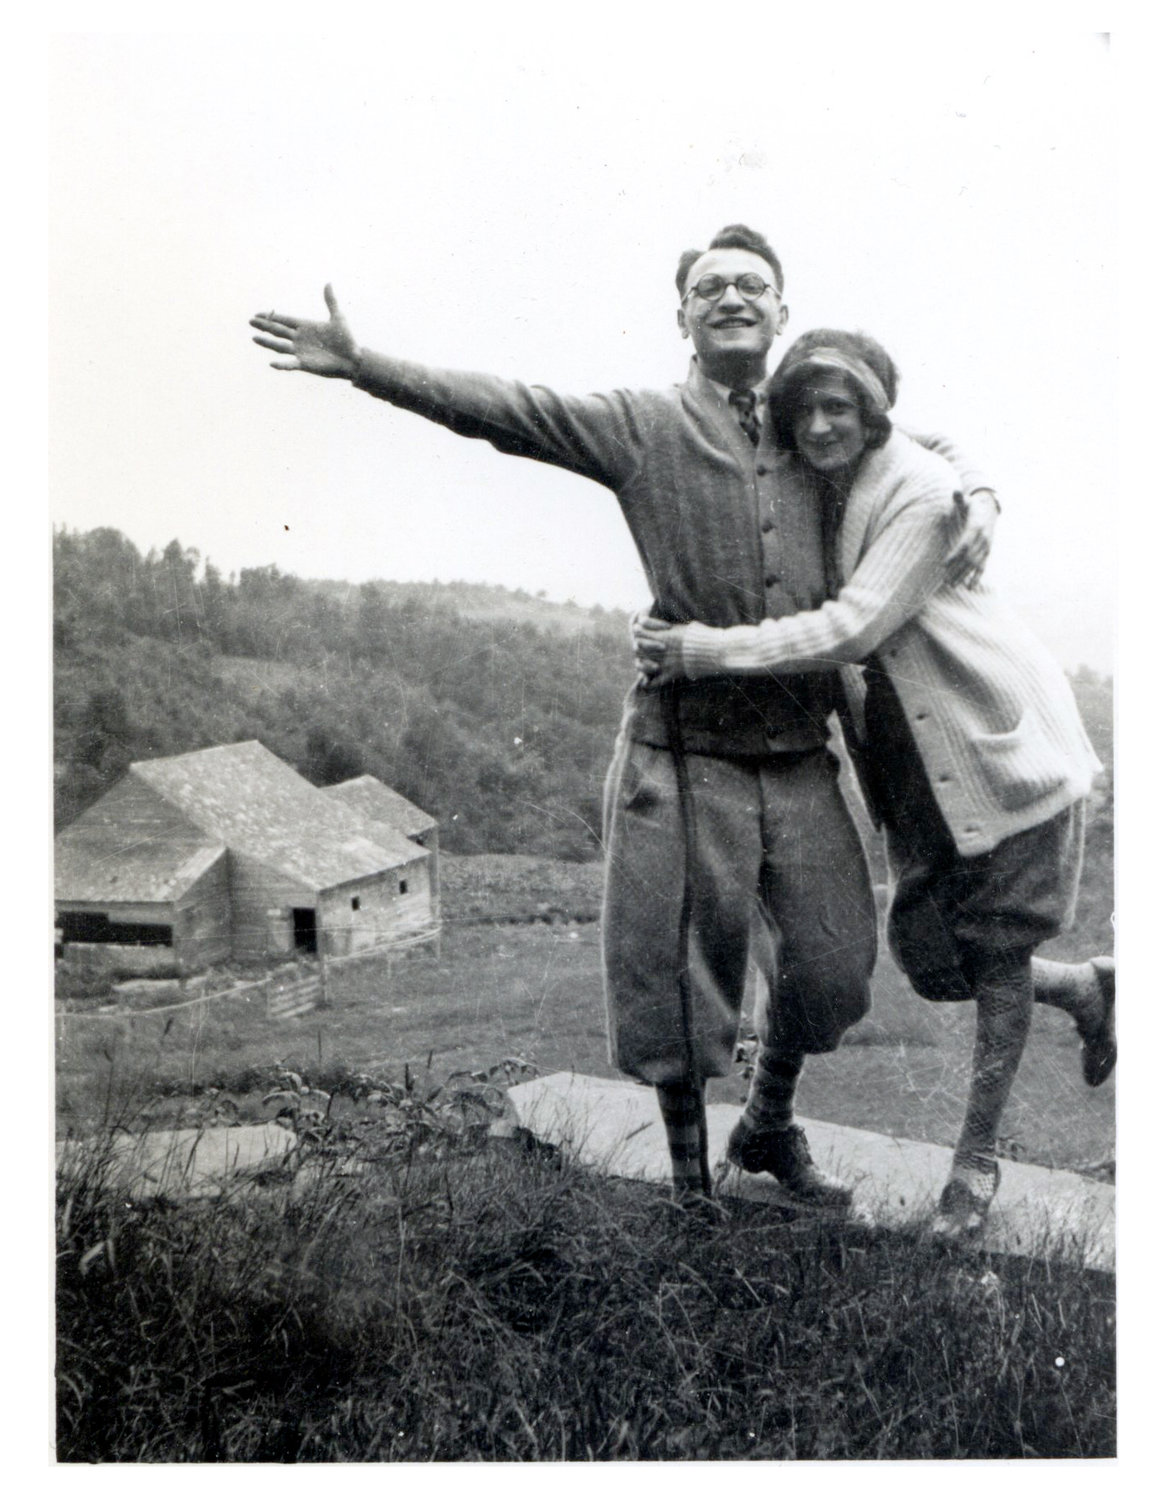 Moe Fink and Betty Cohen, Mike Fink's parents, eloping from Providence to Montreal in August 1926. It was taken at the Vermont inn.